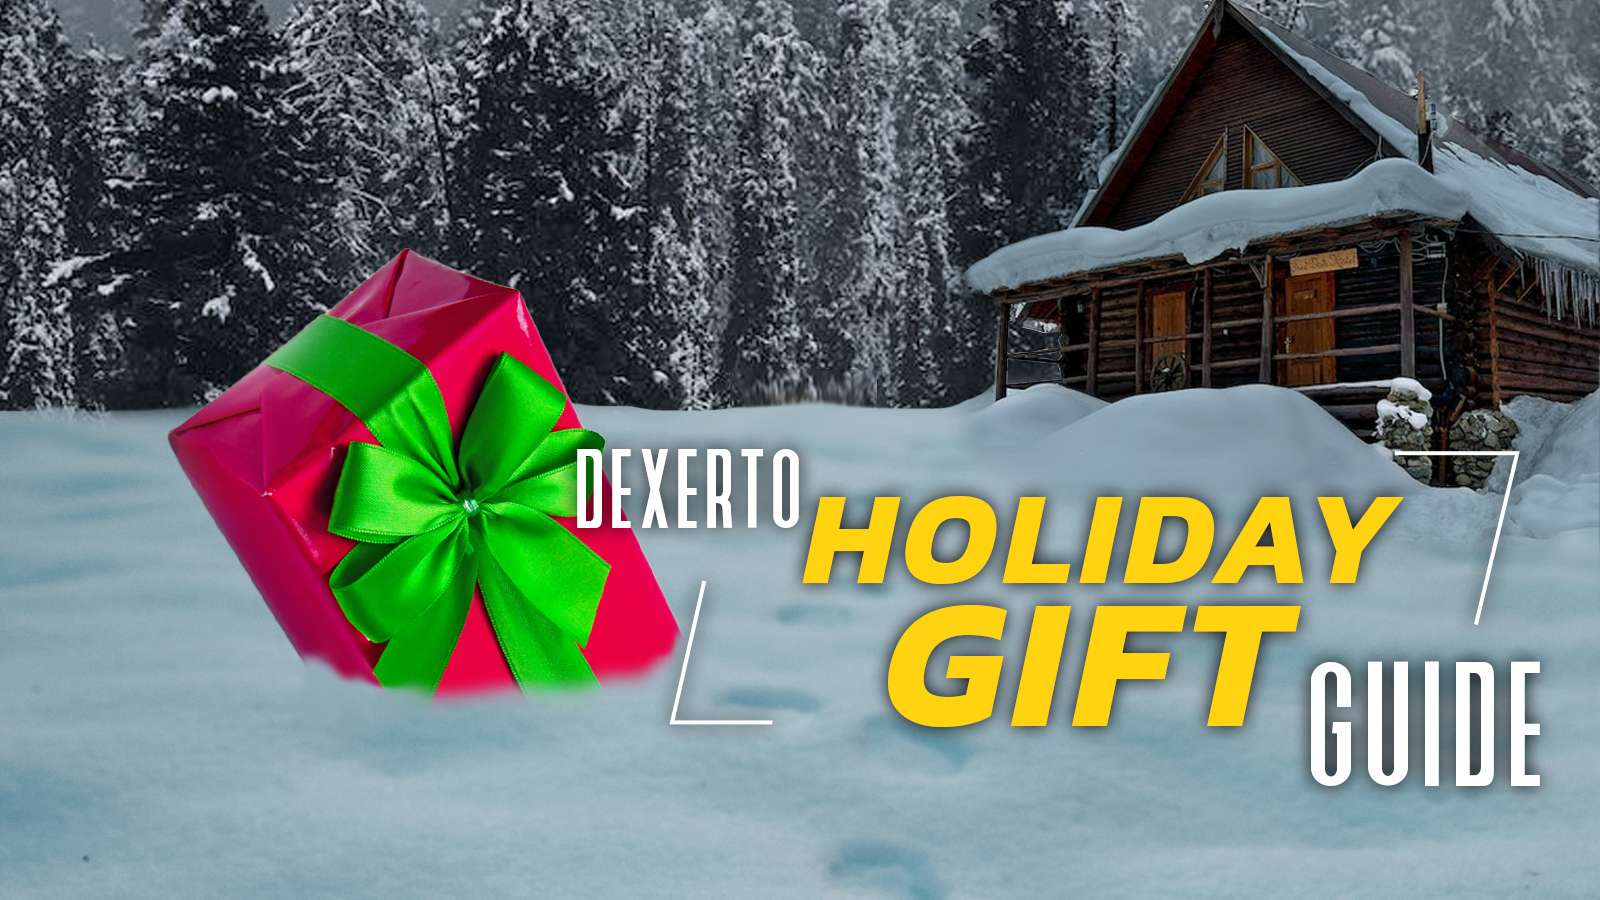 Dexerto Holiday Gift Guide